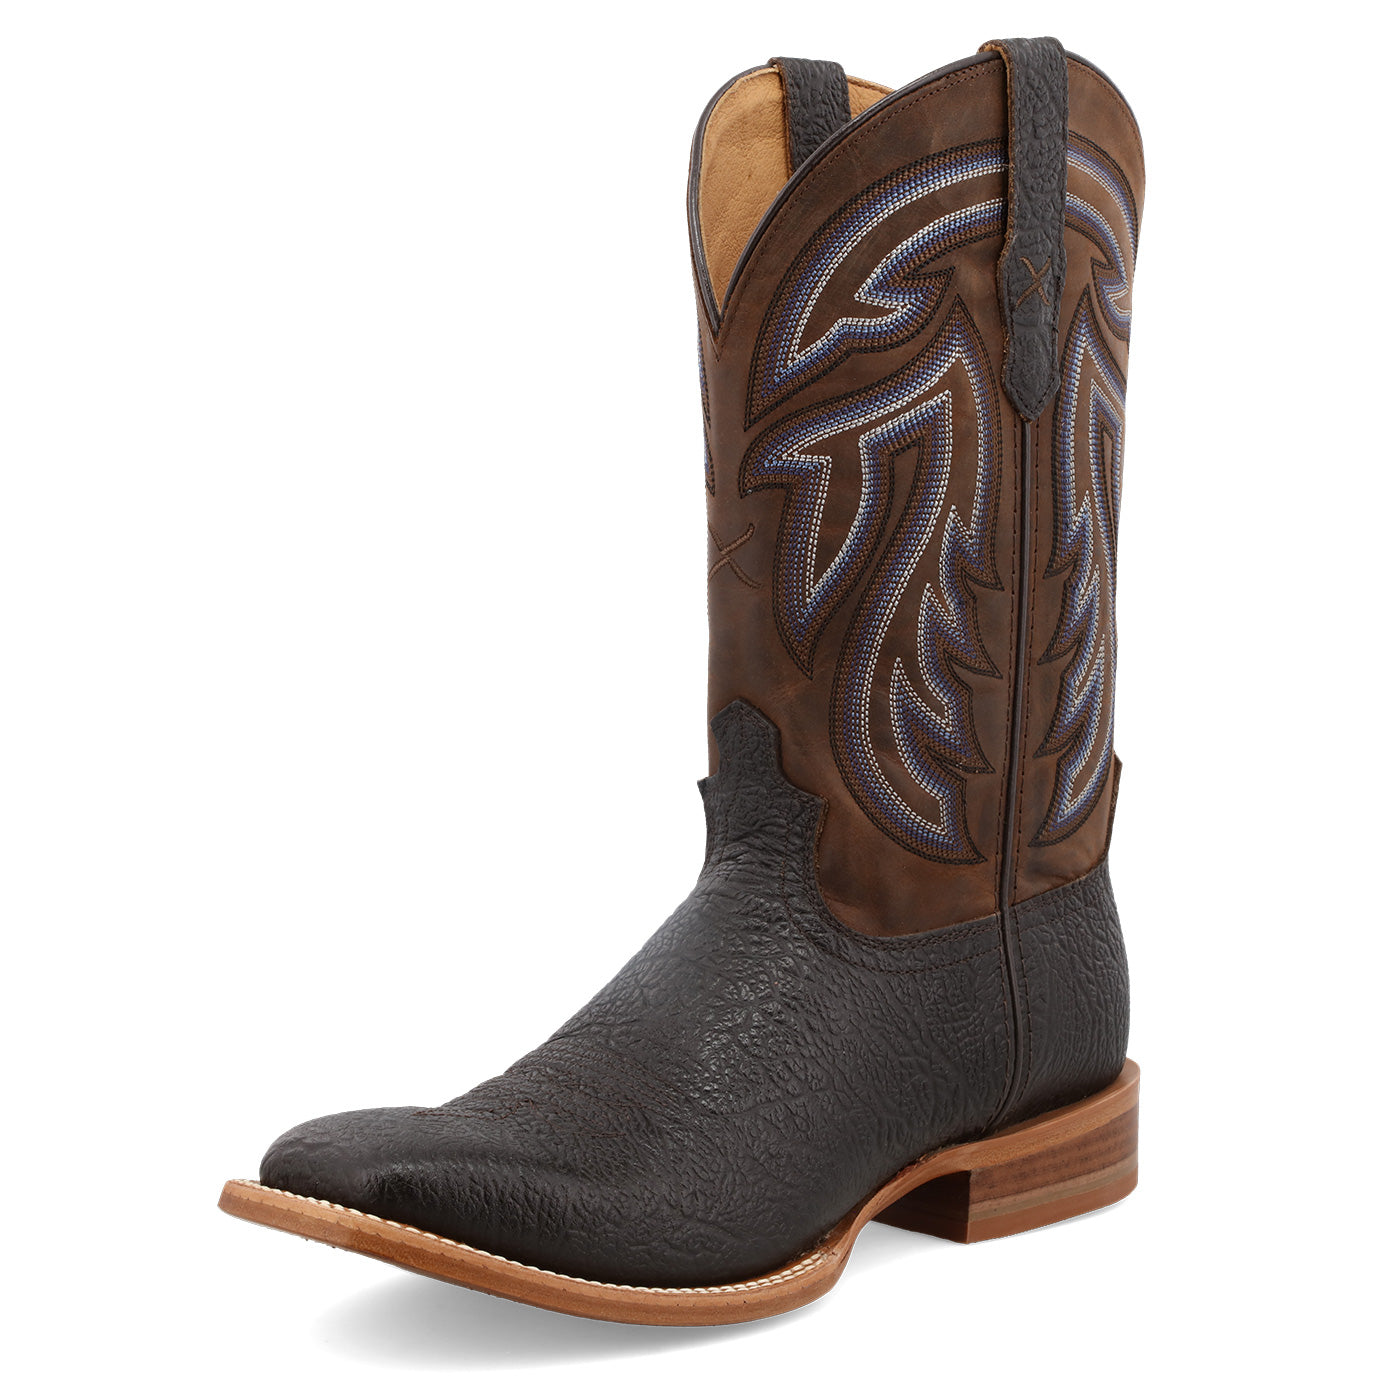 Men's 12" Rancher Boot Twisted X MRAL023